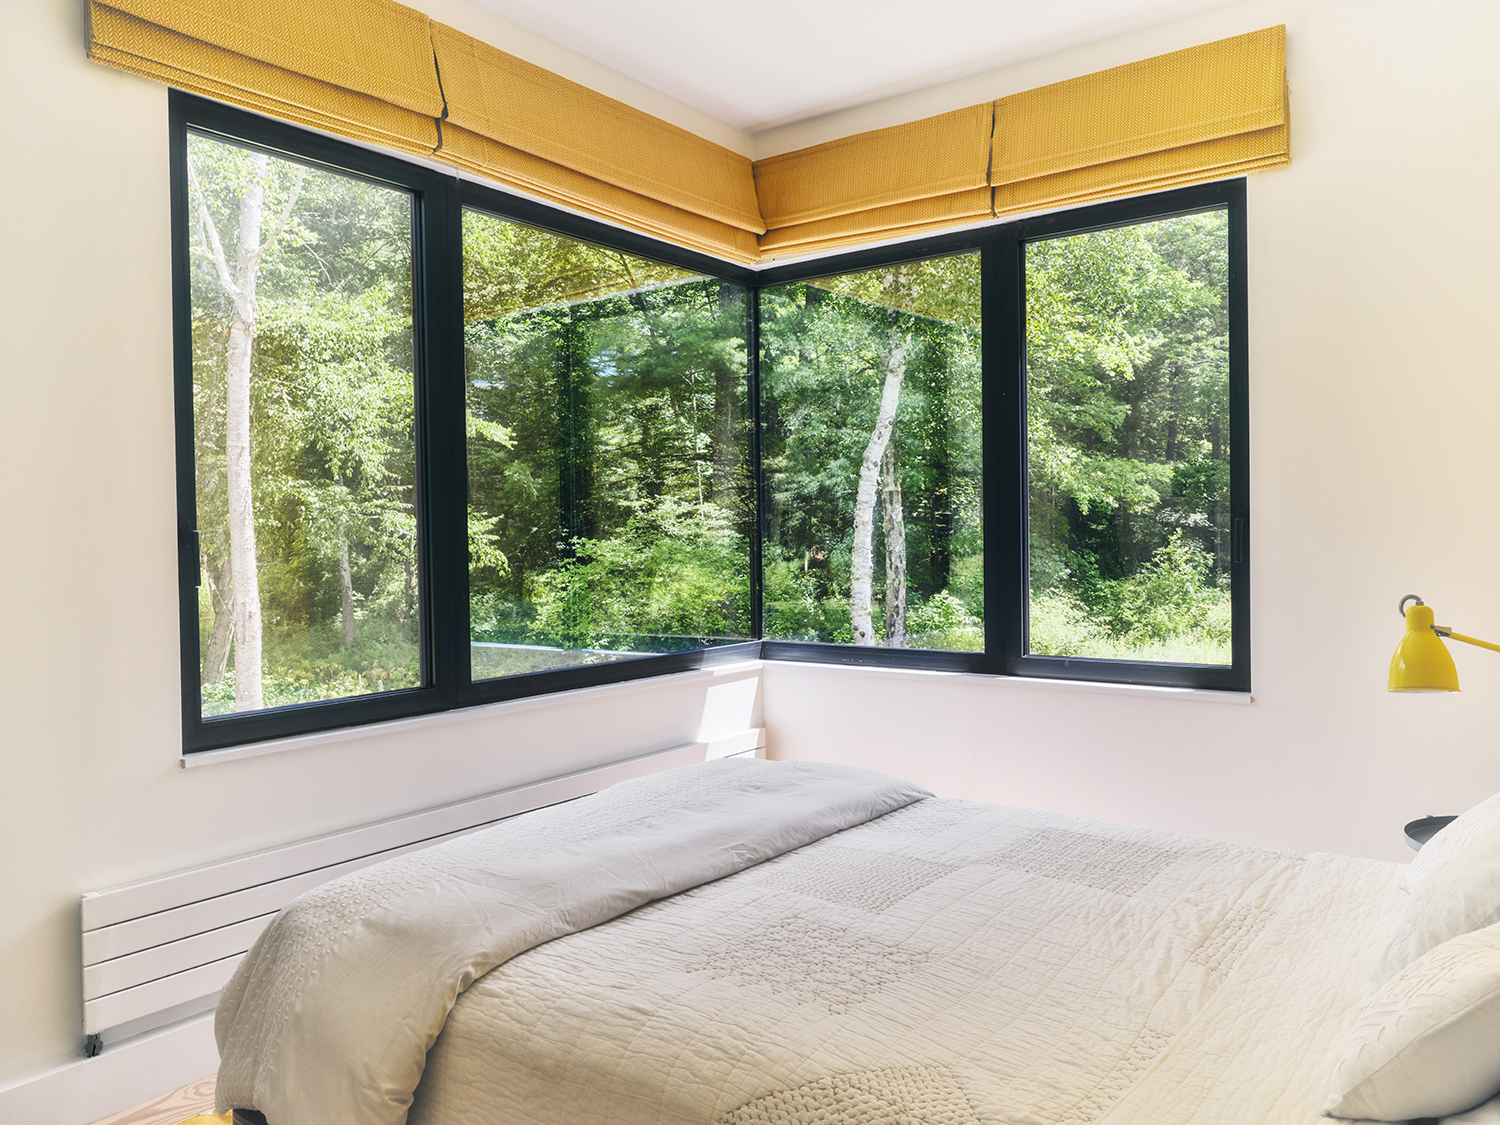 interior bedroom photo from passive house interior design project.